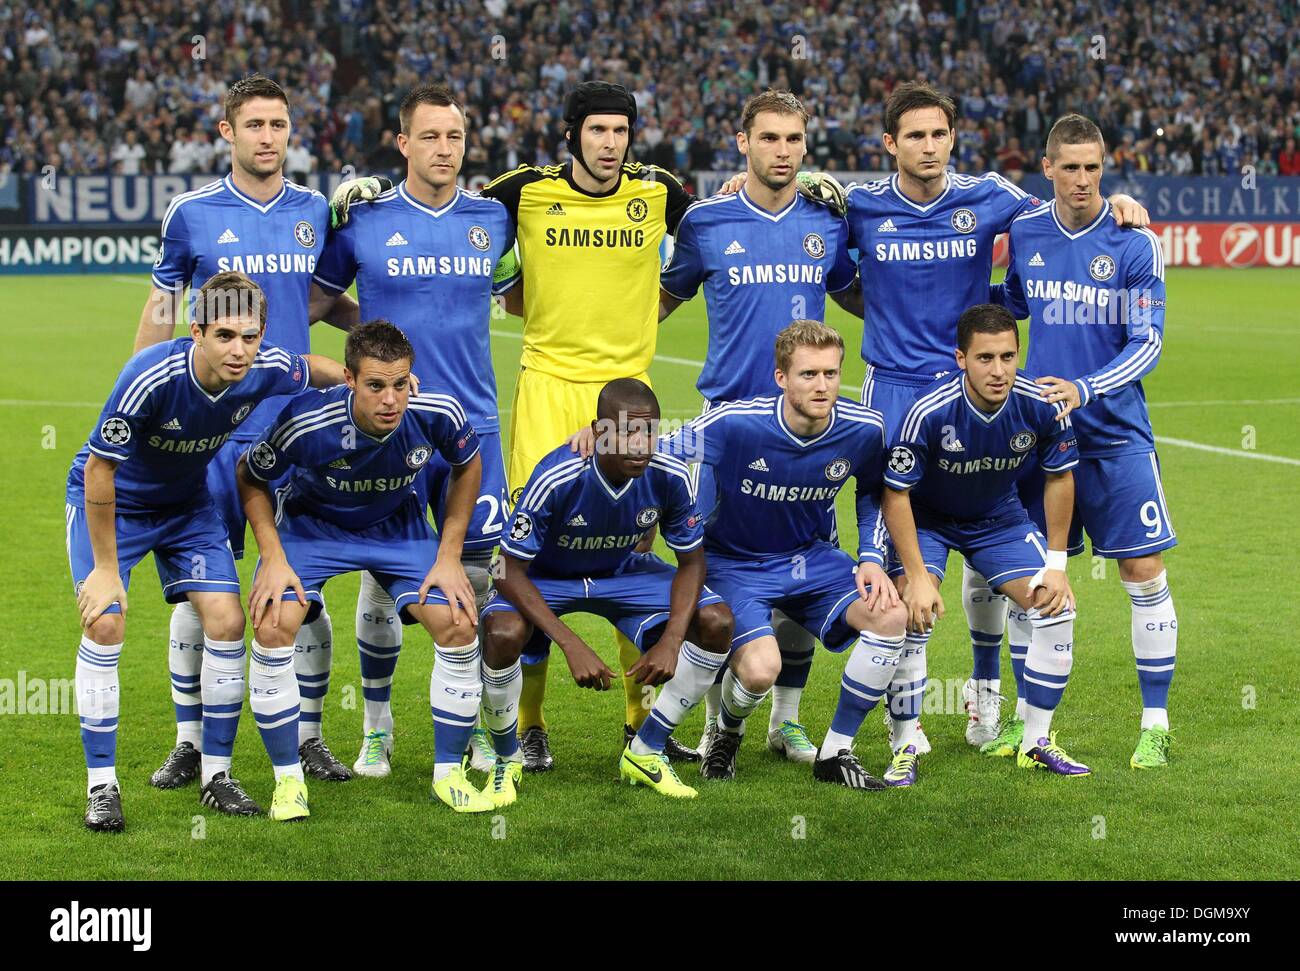 Gelsenkirchen, Germany. 22nd Oct, 2013. Chelsea poses for a team photo with (back L-R) Gary Cahill, John Terry, goalkeeper Petr Cech, Branislav Ivanovic, Frank Lampard, Fernando Torres; (front L-R) Oscar, Cesar Azpilicueta , Ramires, Andre Schuerrle, Eden Hazard, during the Champions League group E soccer match betwen FC Schalke 04 and FC Chelsea at the Gelsenkirchen stadium in Gelsenkirchen, Germany, 22 October 2013. Photo: Friso Gentsch/dpa/Alamy Live News Stock Photo